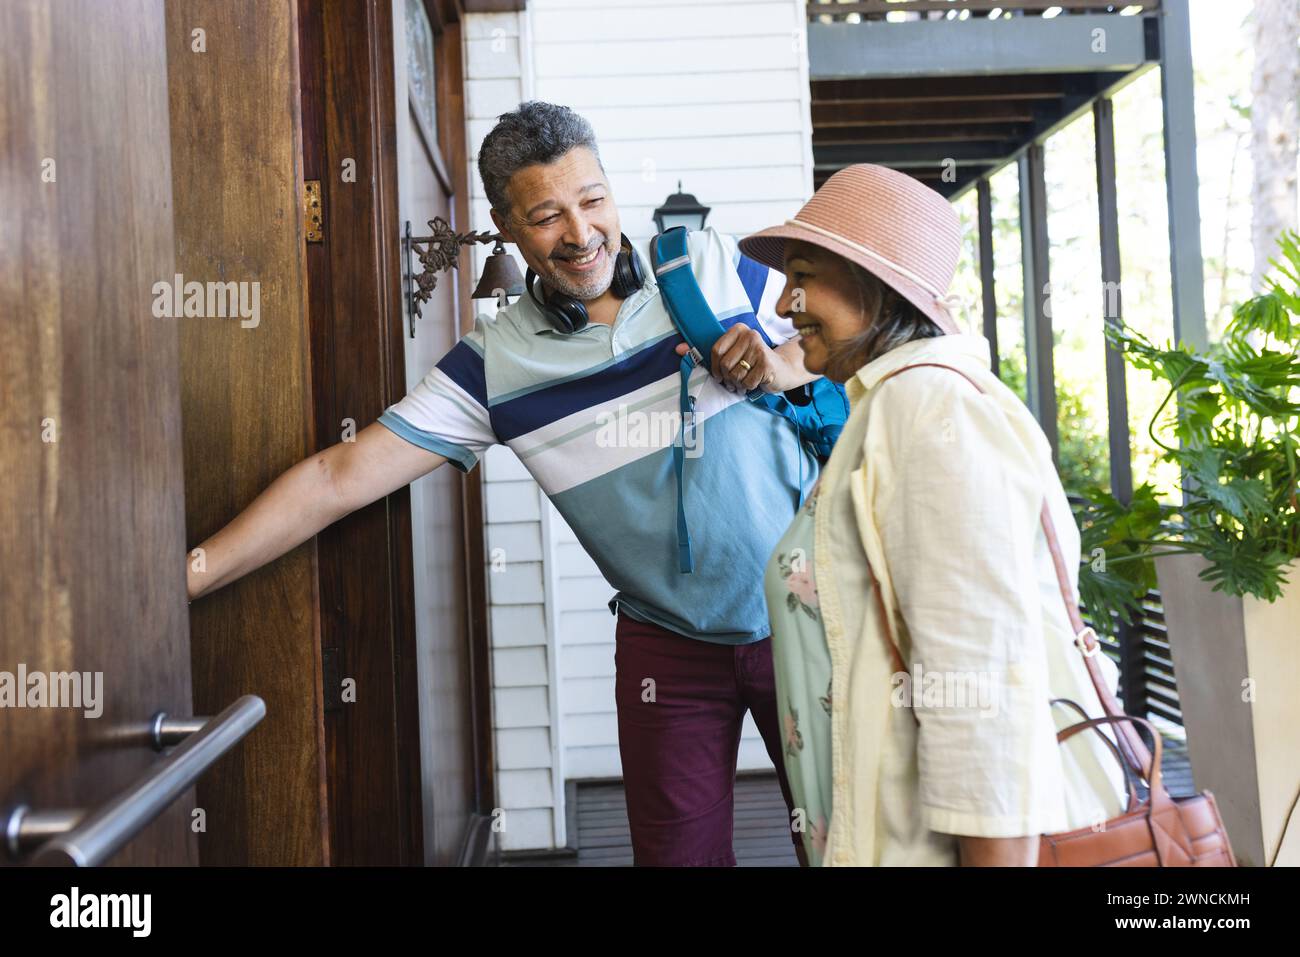 Senior biracial couple is smiling as the man opens a door for the woman Stock Photo